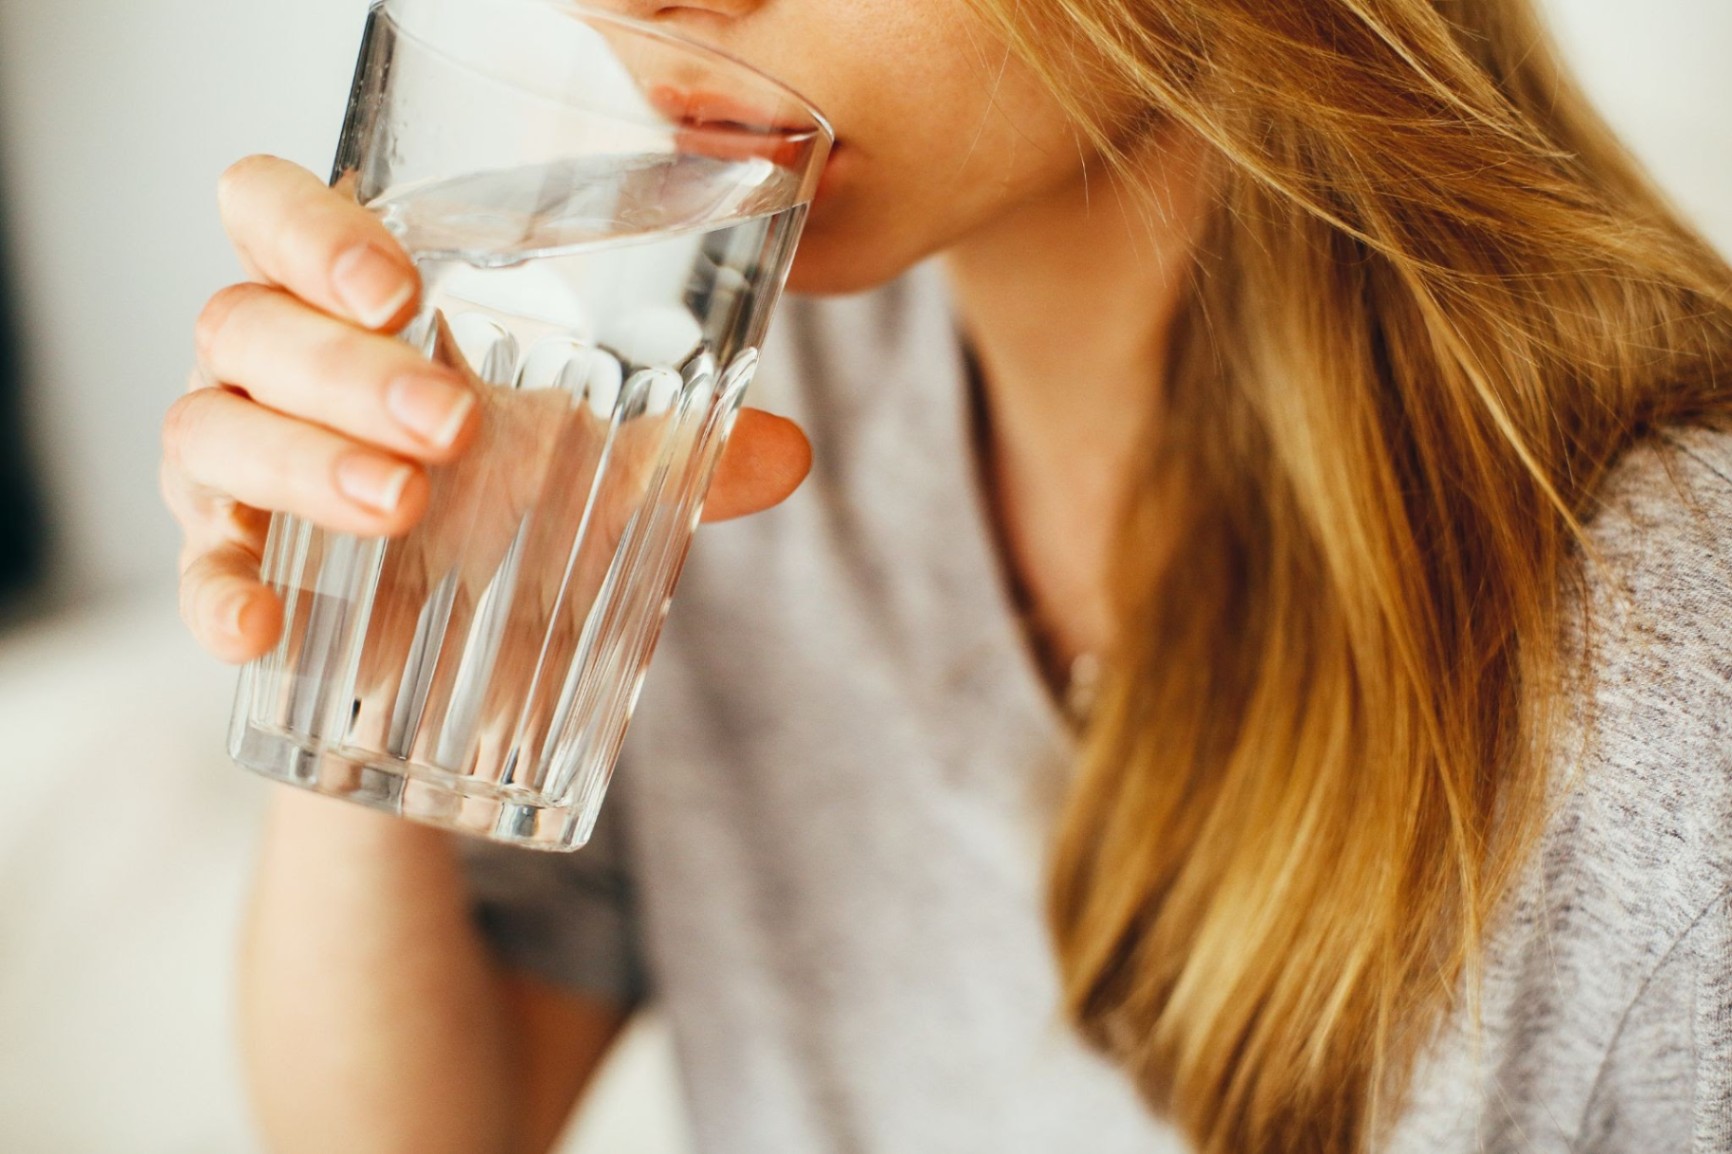 Application To Drink More Water And Become Healthier